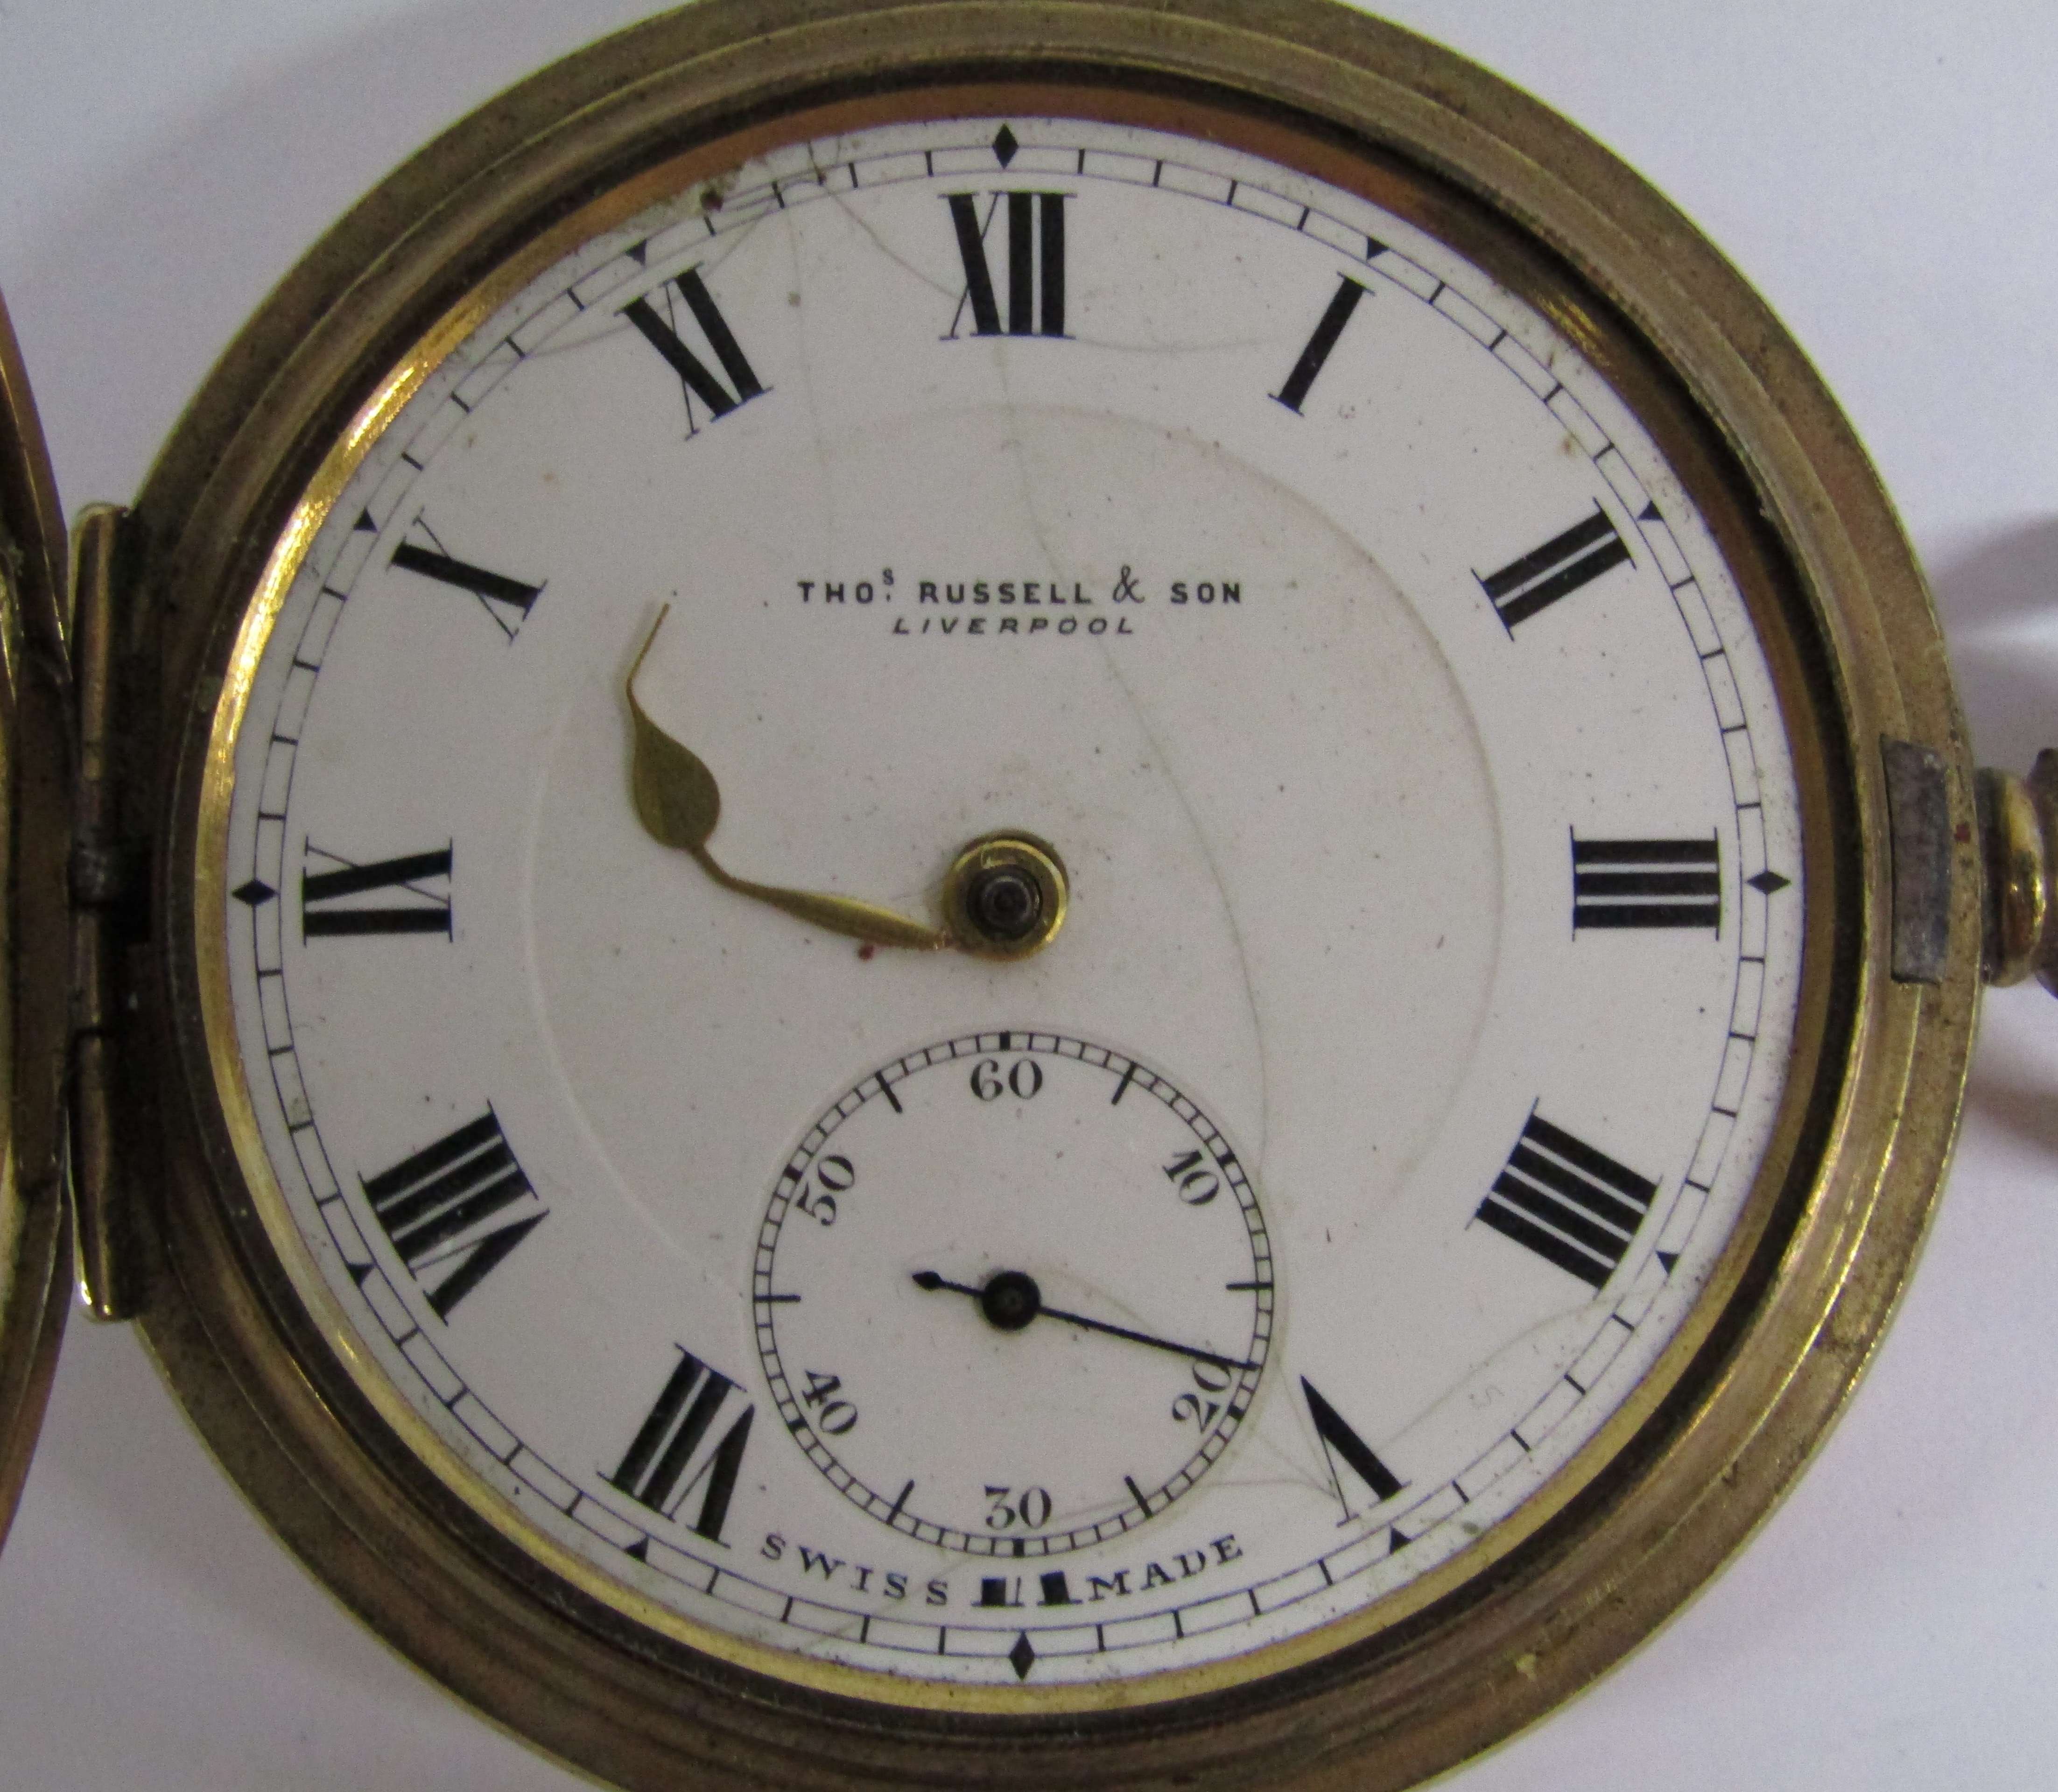 3 pocket watches - A.W.W. Co Waltham Mass gold plated, Thomas Russell & Son Liverpool gold plated - Image 8 of 18